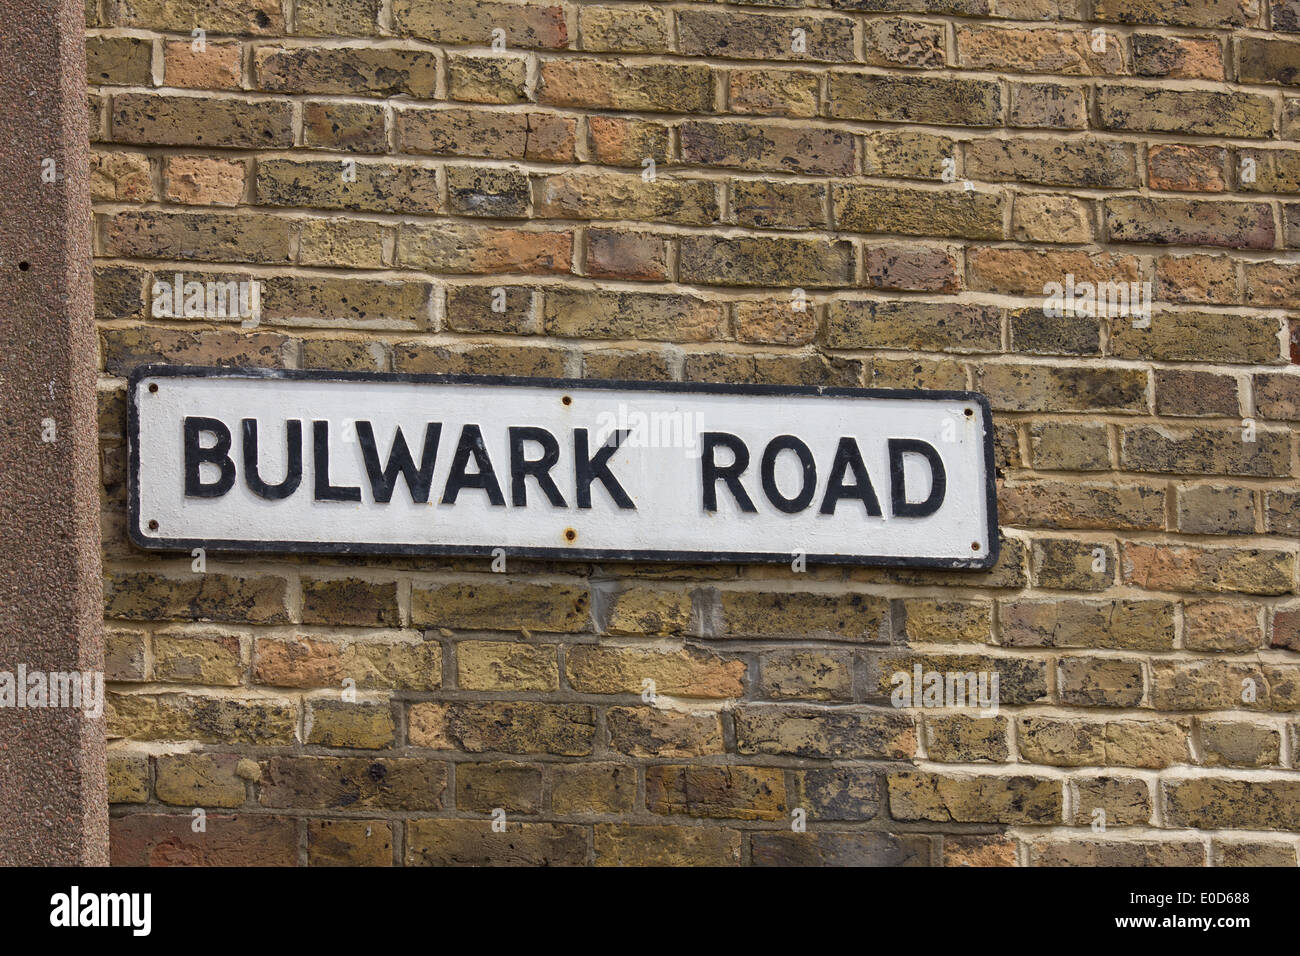 Street name Bulwark Road sign against a brick background Stock Photo